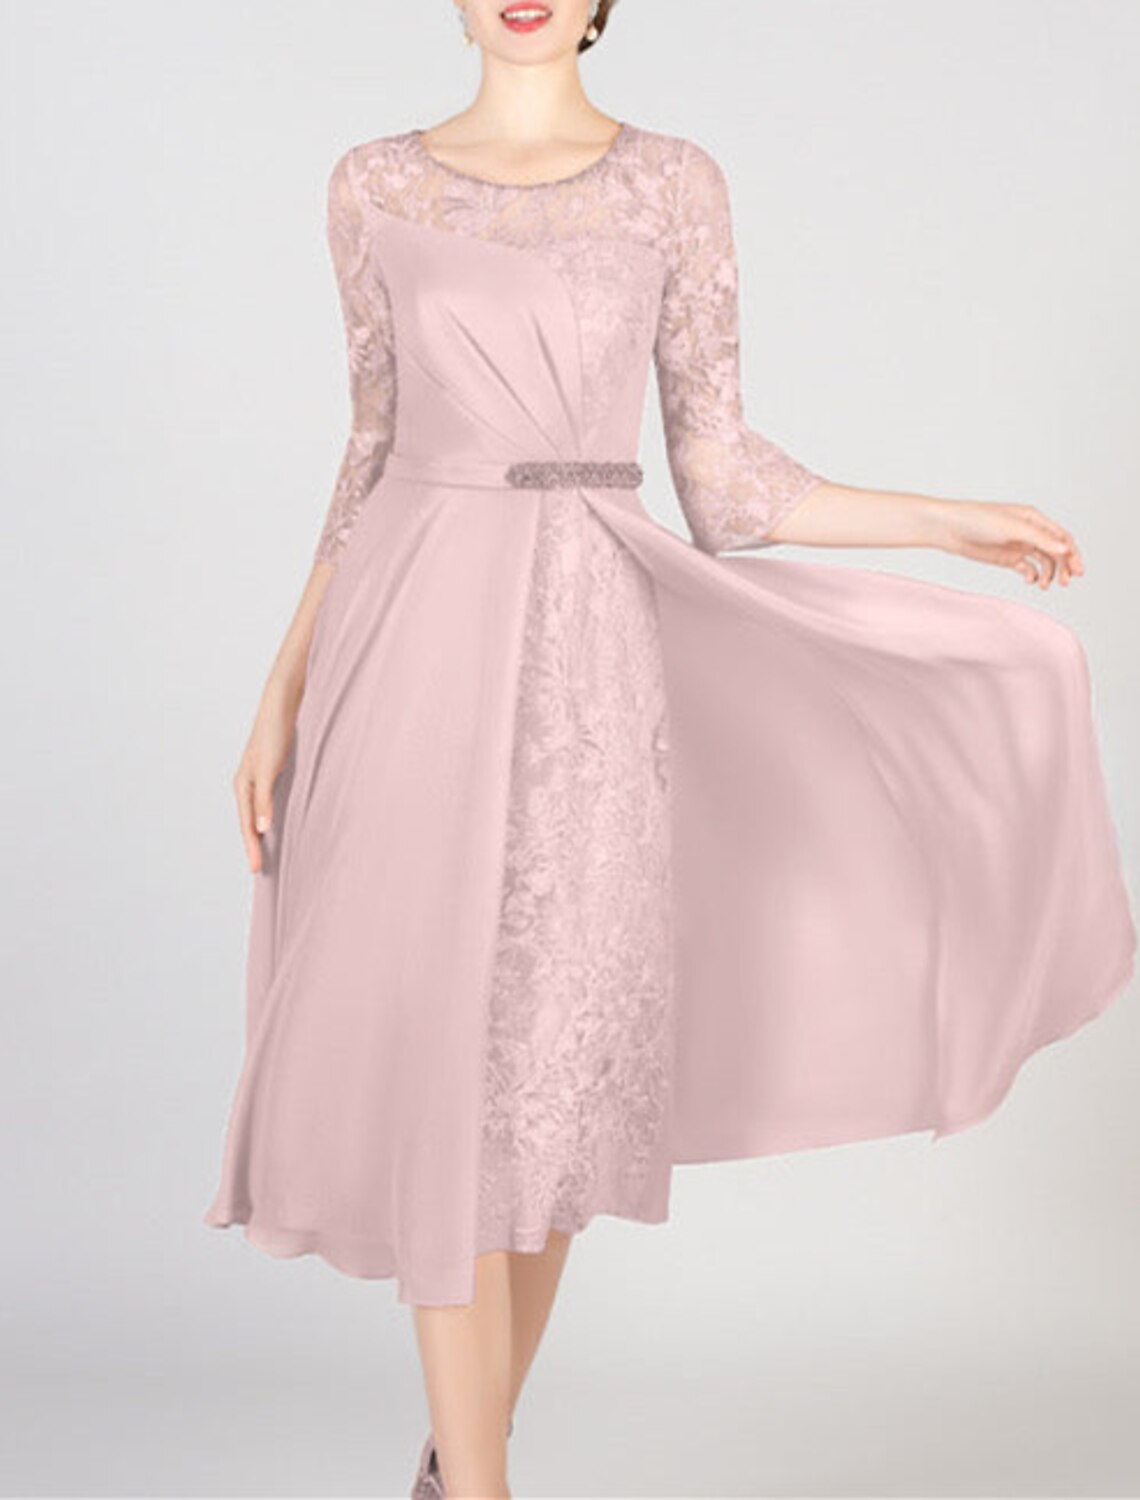 A-Line Mother of the Bride Dress Formal Wedding Guest Elegant Bateau Neck Scoop Neck Knee Length Chiffon Lace Half Sleeve with Crystals Appliques Solid Color